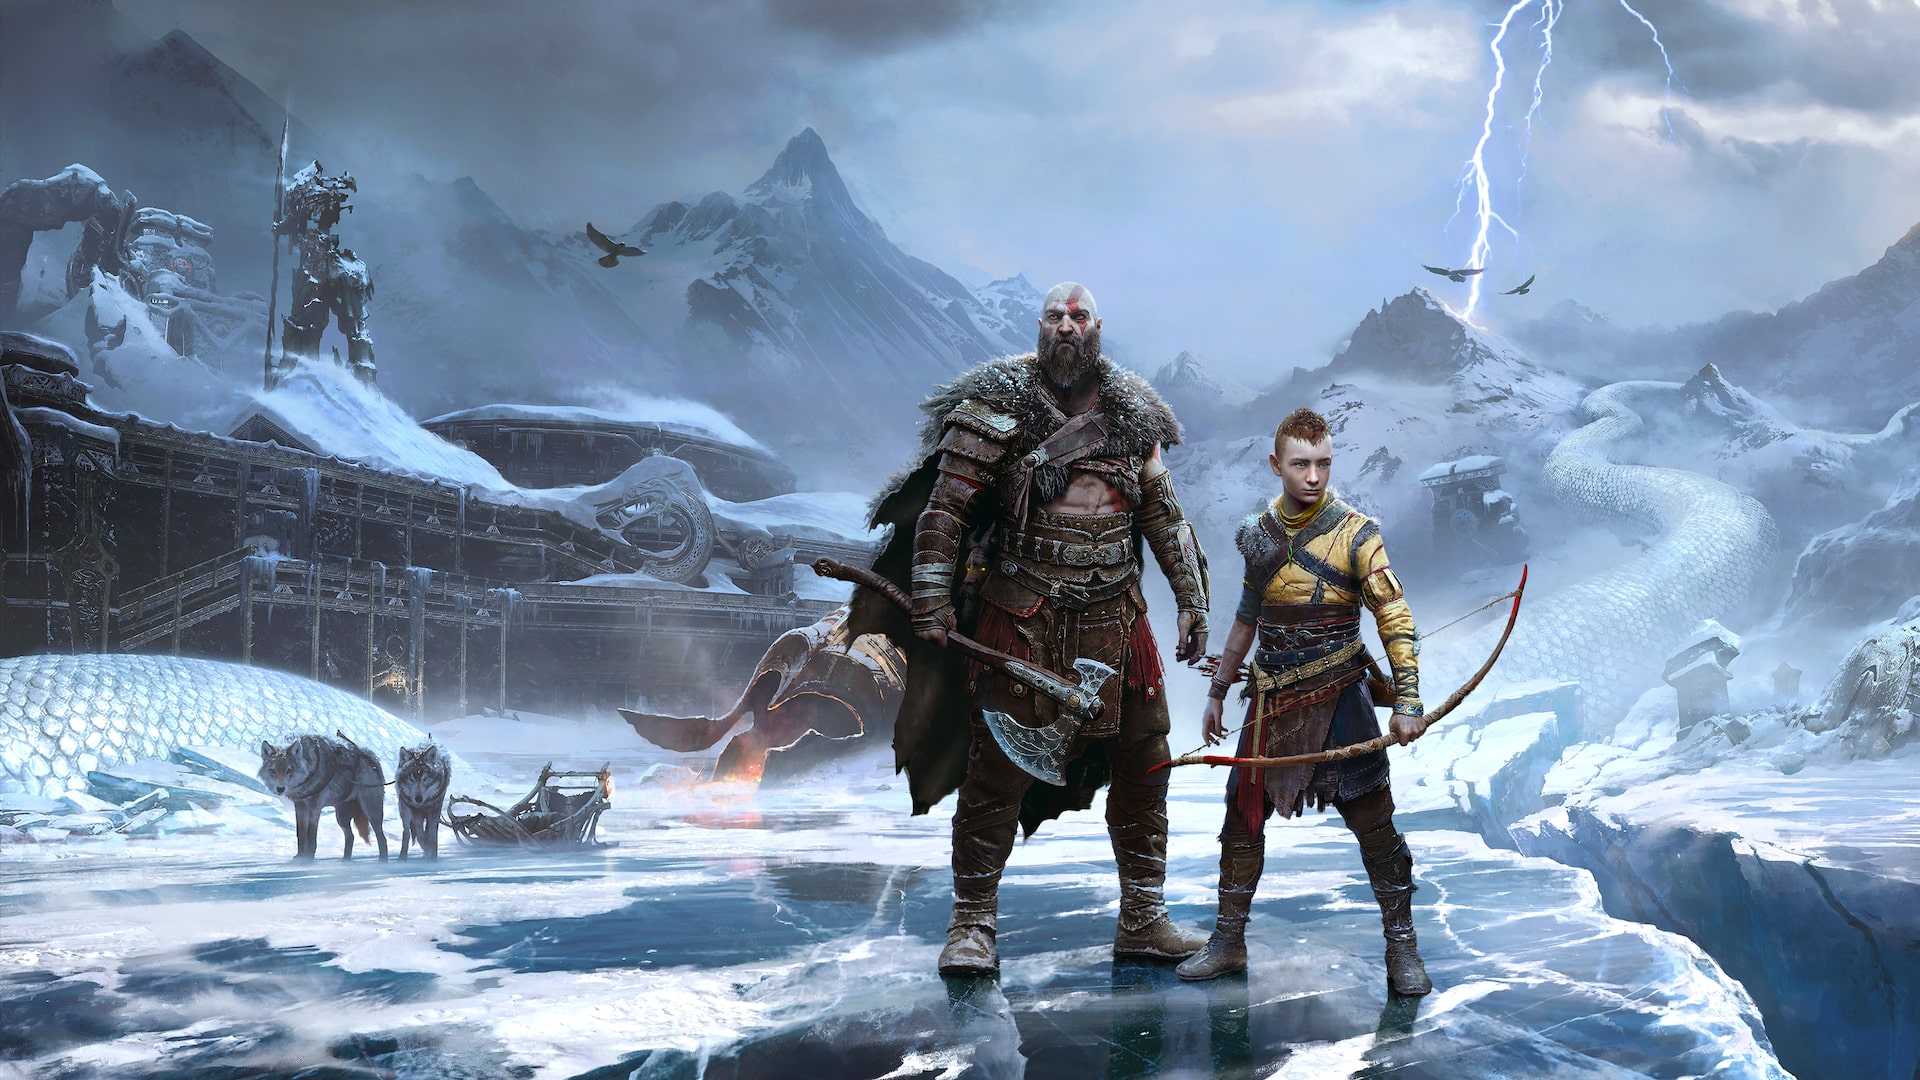 God of WaR Ragnarok is the second best-selling physical game release in the UK of 2022